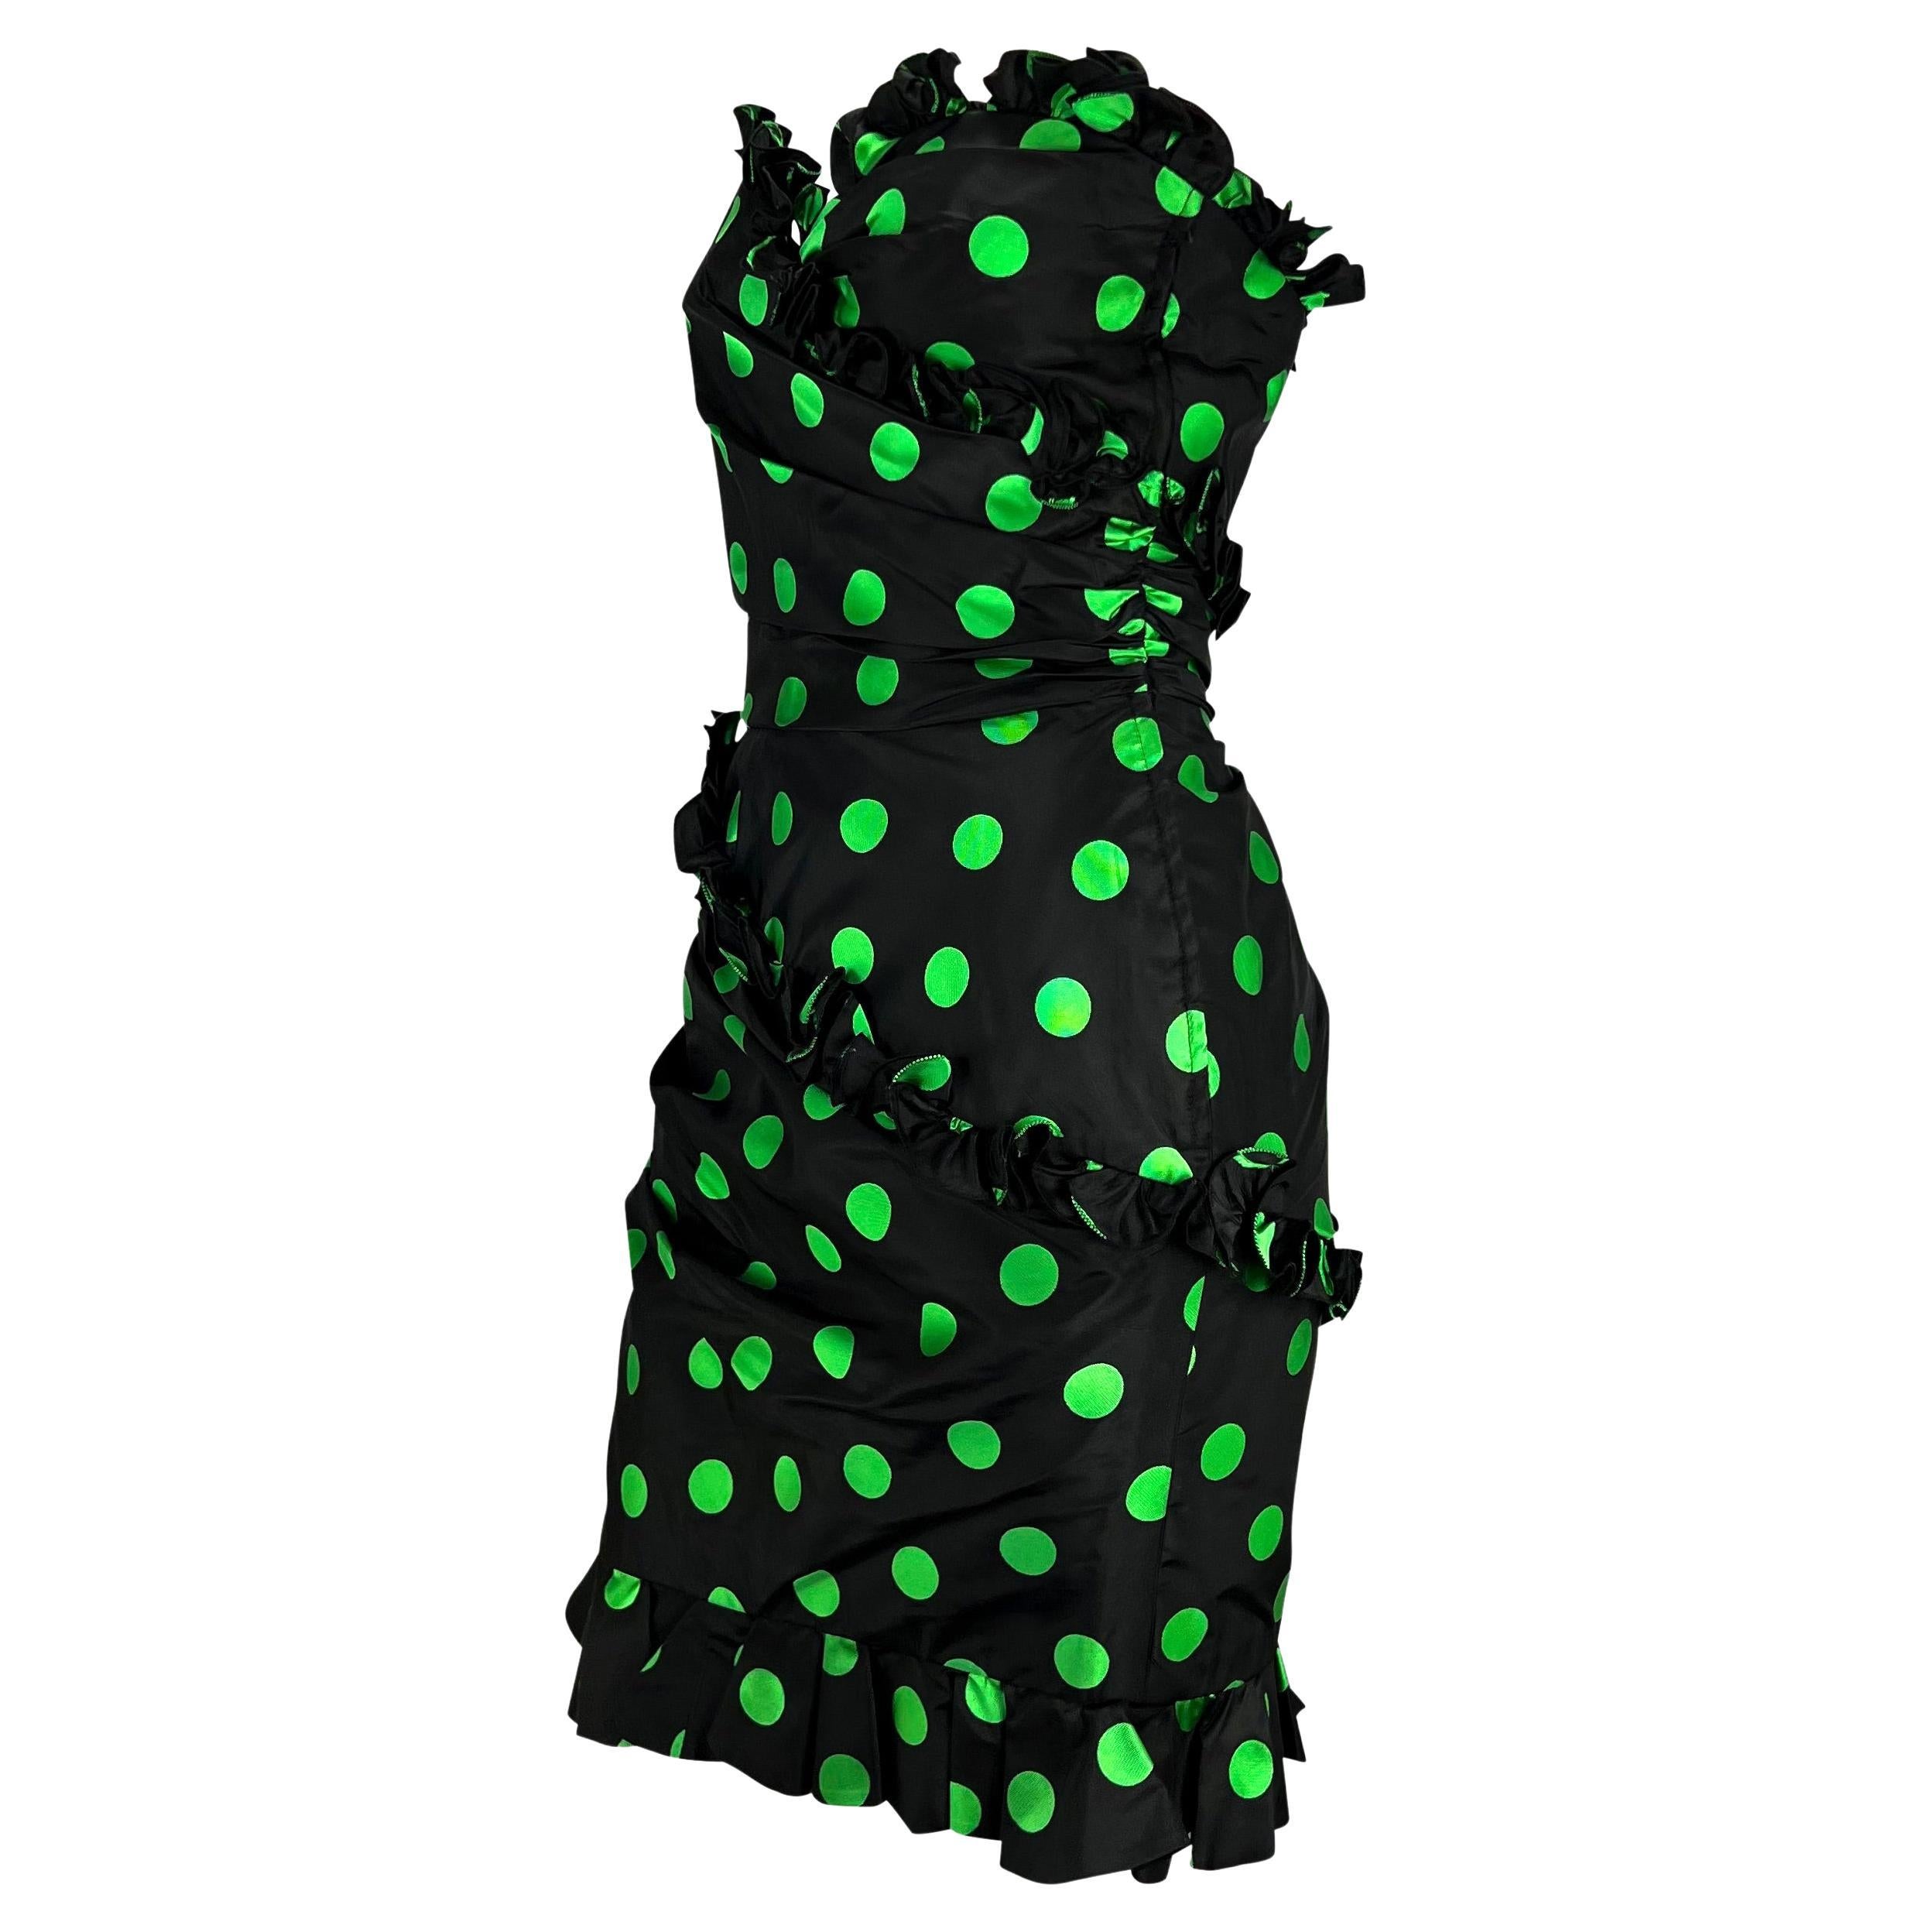 TheRealList presents: an incredible black and green polka dot Emanuel Ungaro dress. From the 1980s, this strapless dress is covered in bright green dots and is wrapped in ruffles. Fabulous and camp, this vintage dress features an 80s look with a